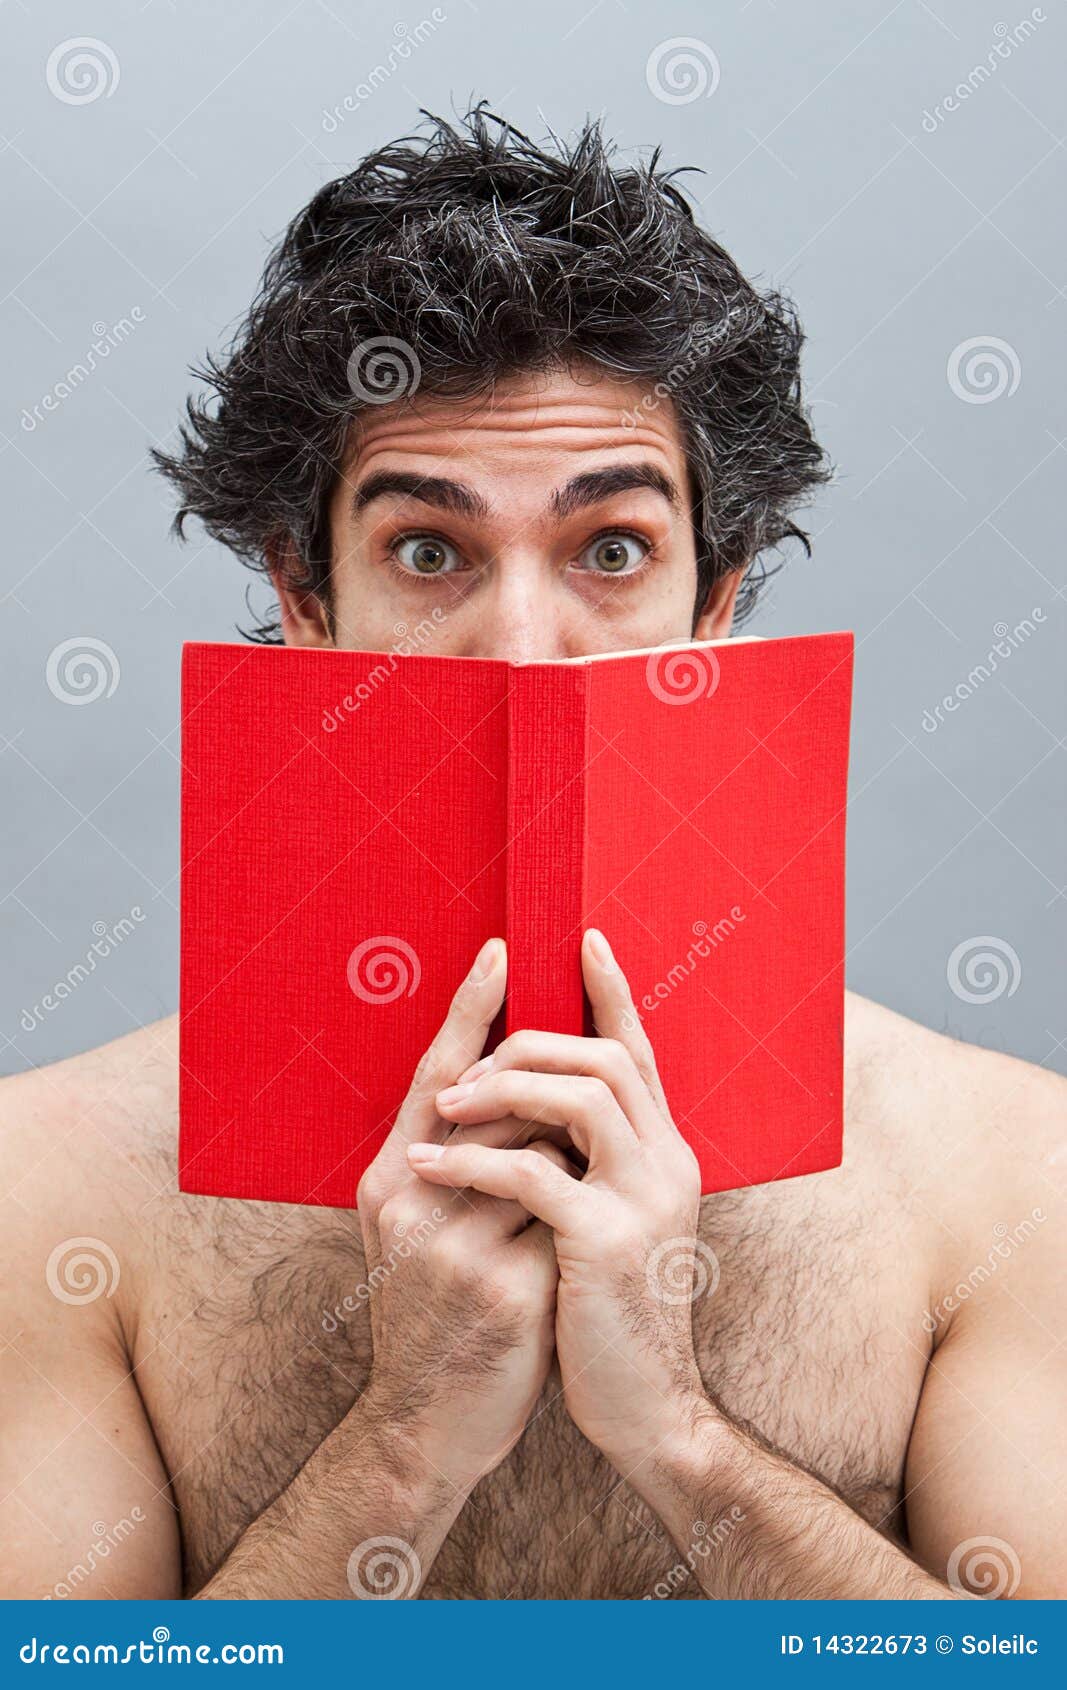 college student reading an interesting book